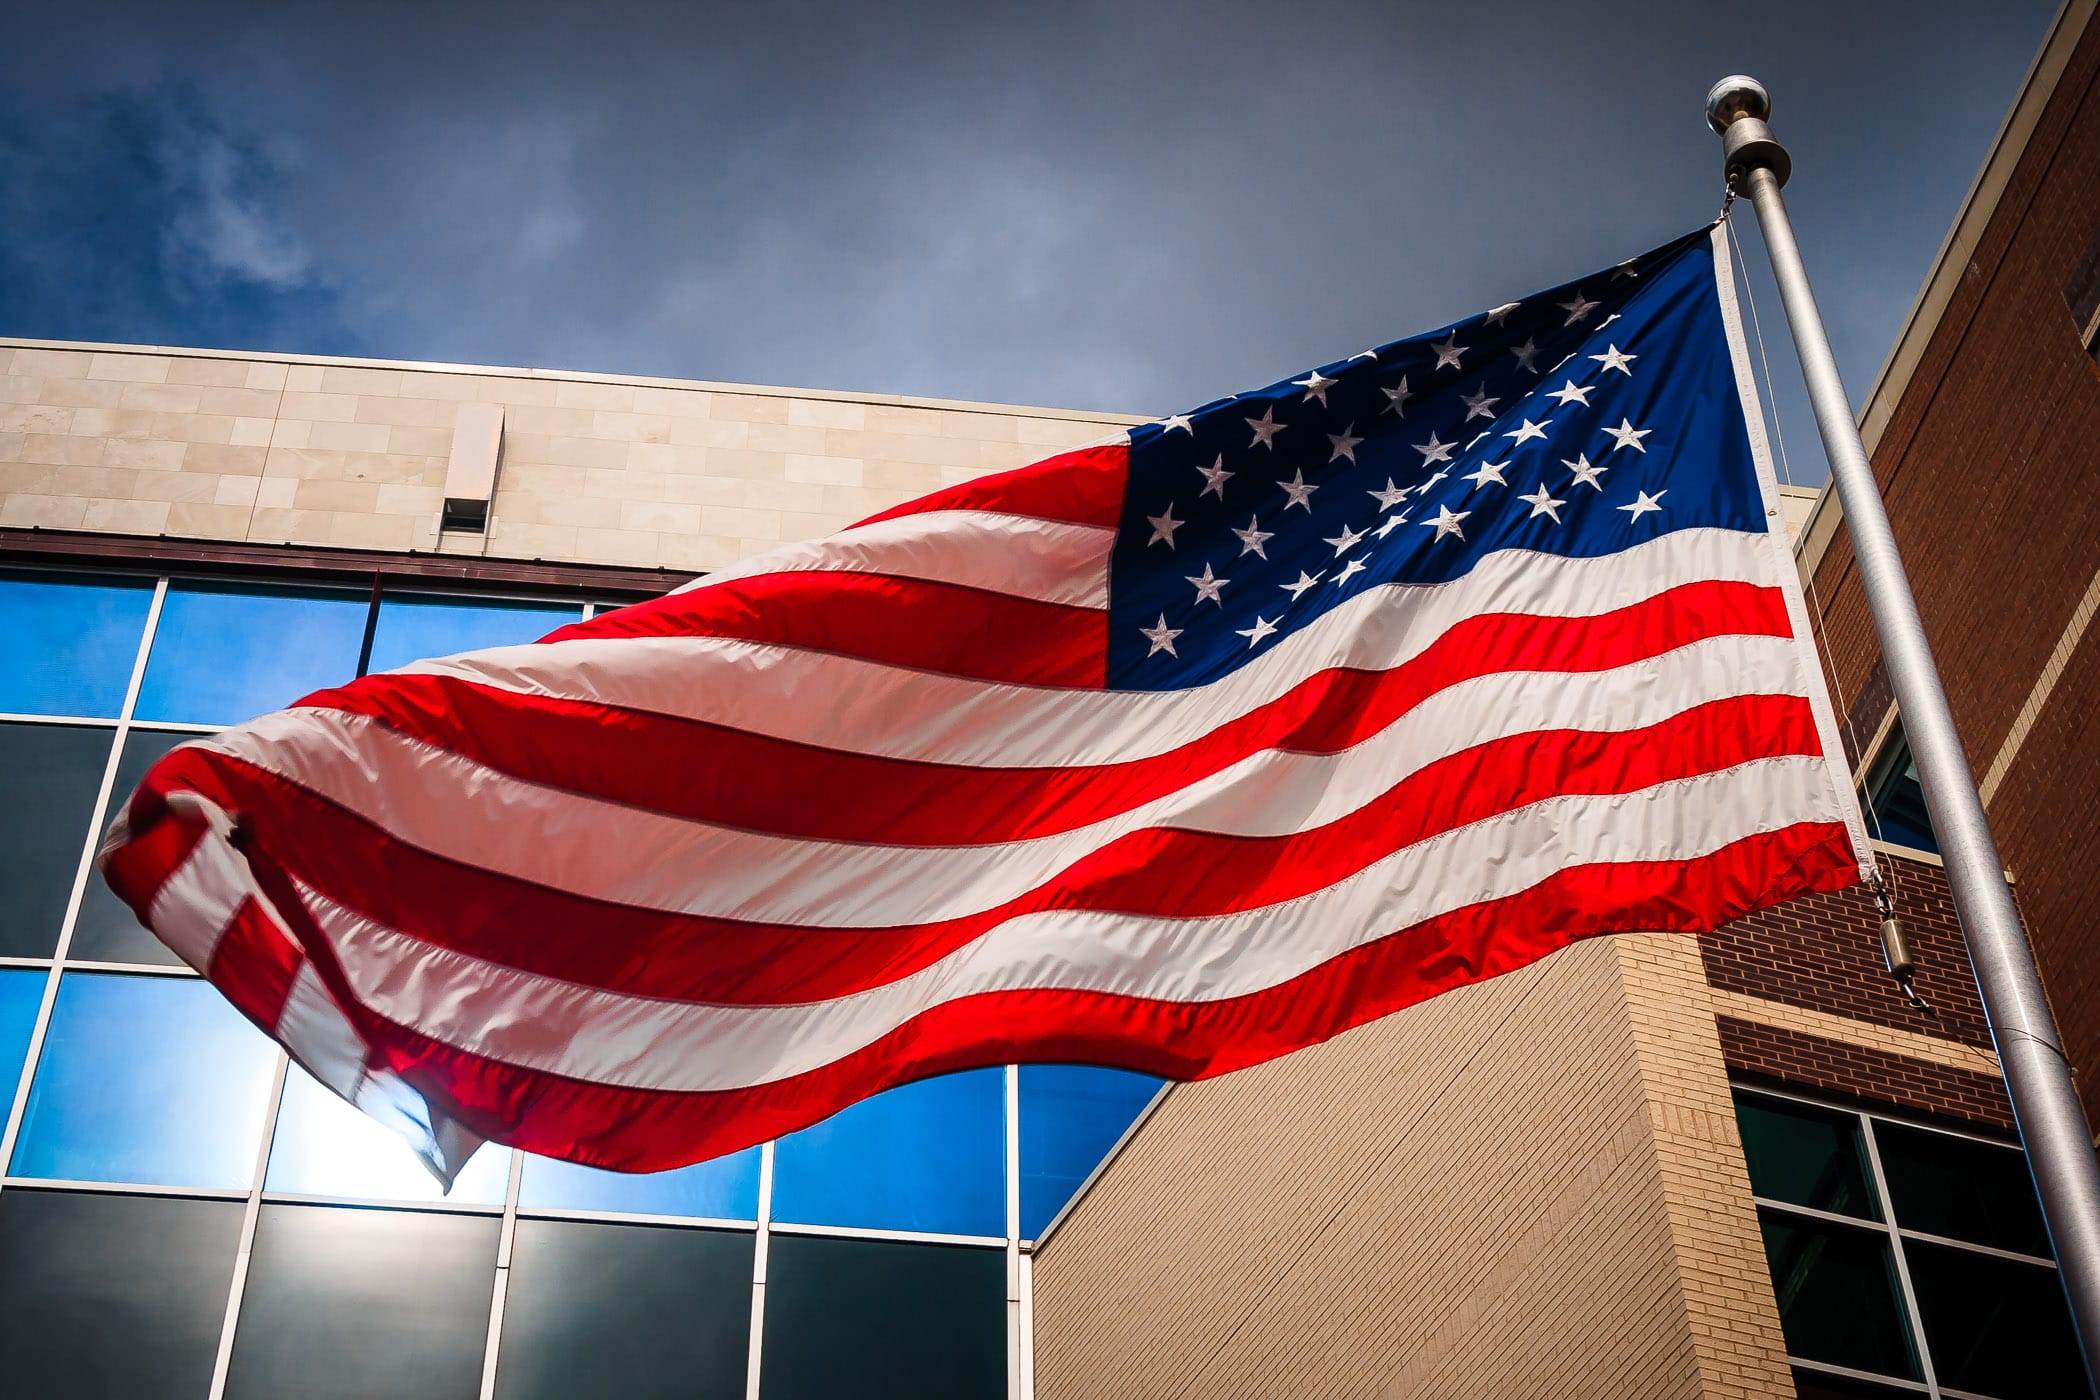 An American flag waves in the wind outside the Dallas Police Department Headquarters in The Cedars, Dallas, Texas.